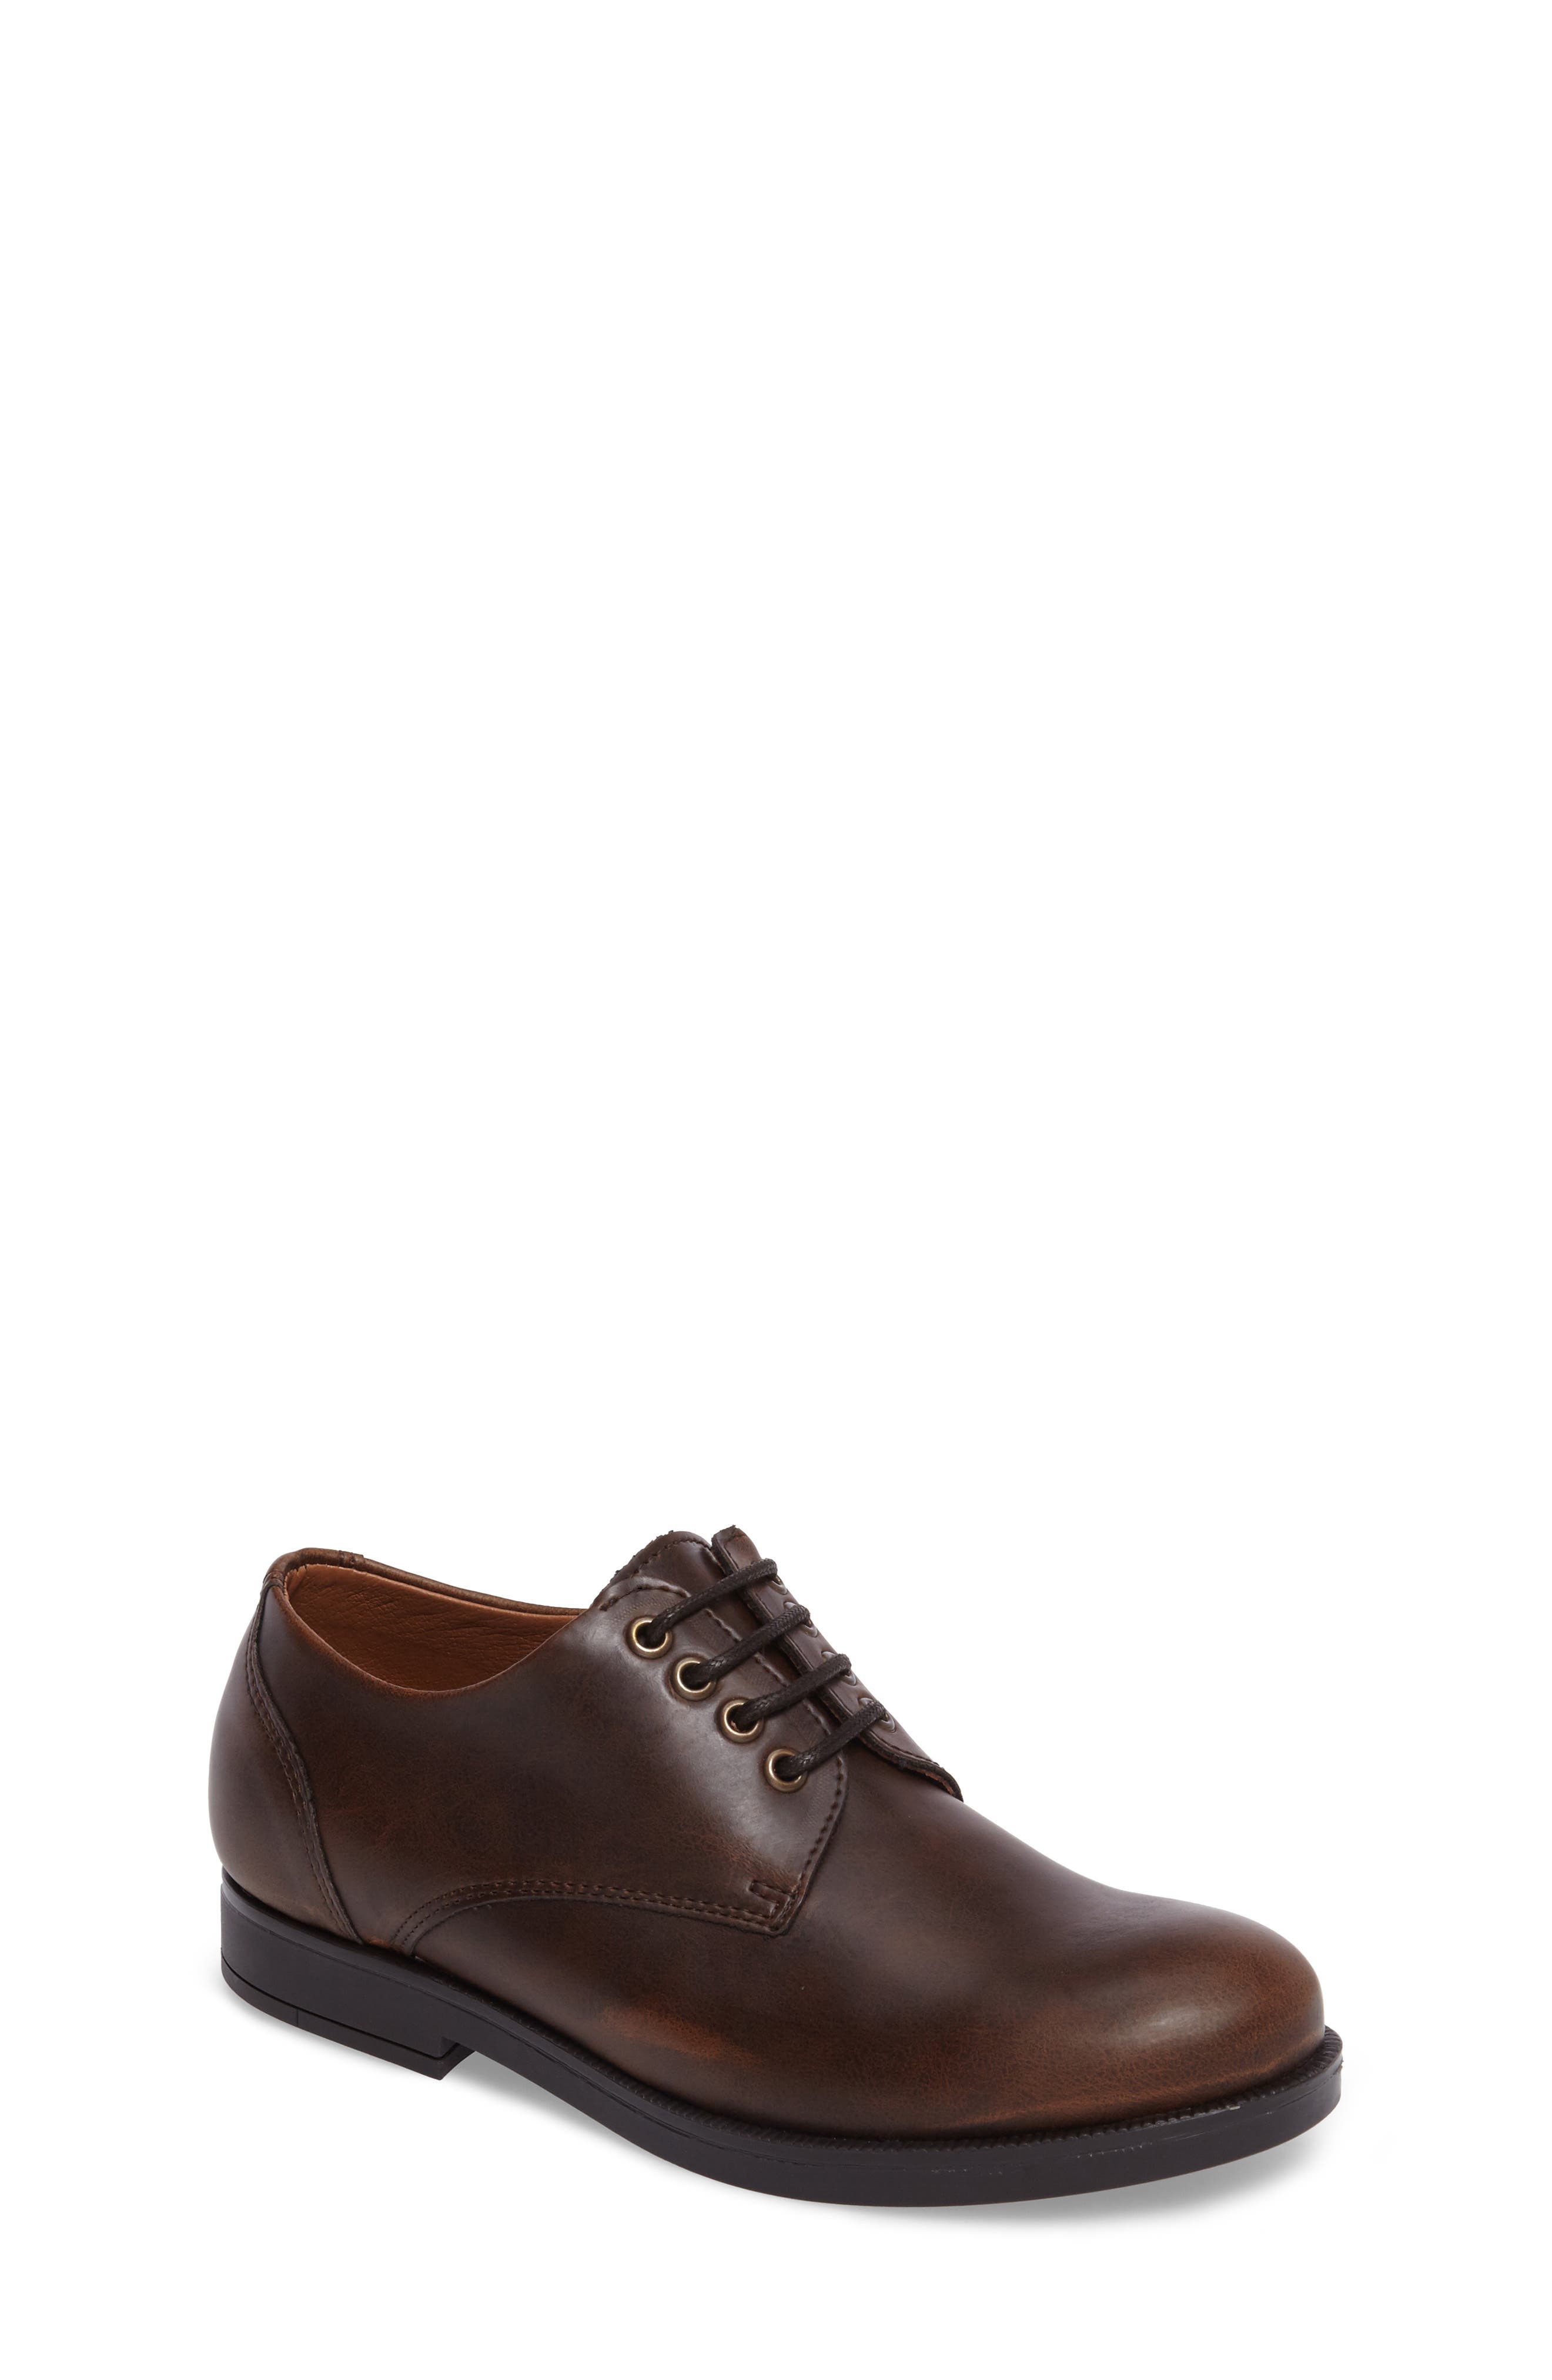 UPC 190937165924 product image for Boy's Vince Camuto Kalb Plain Toe Oxford, Size 4.5 M - Brown | upcitemdb.com